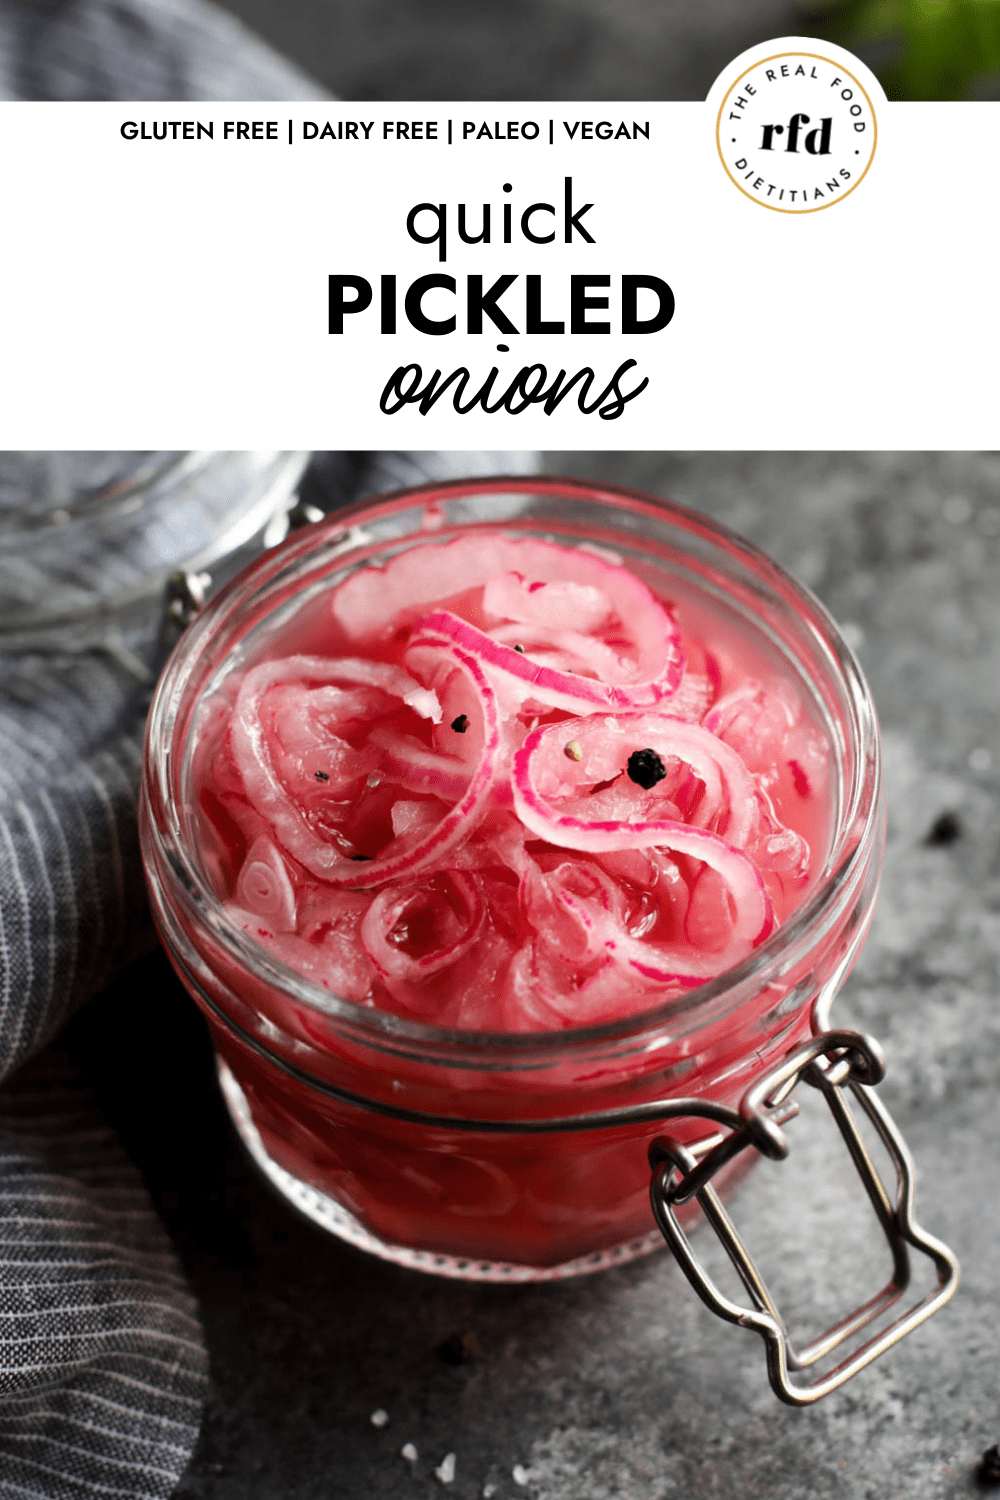 https://therealfooddietitians.com/wp-content/uploads/2022/01/Quick-Pickled-Onions-1000-x-1500-px.png